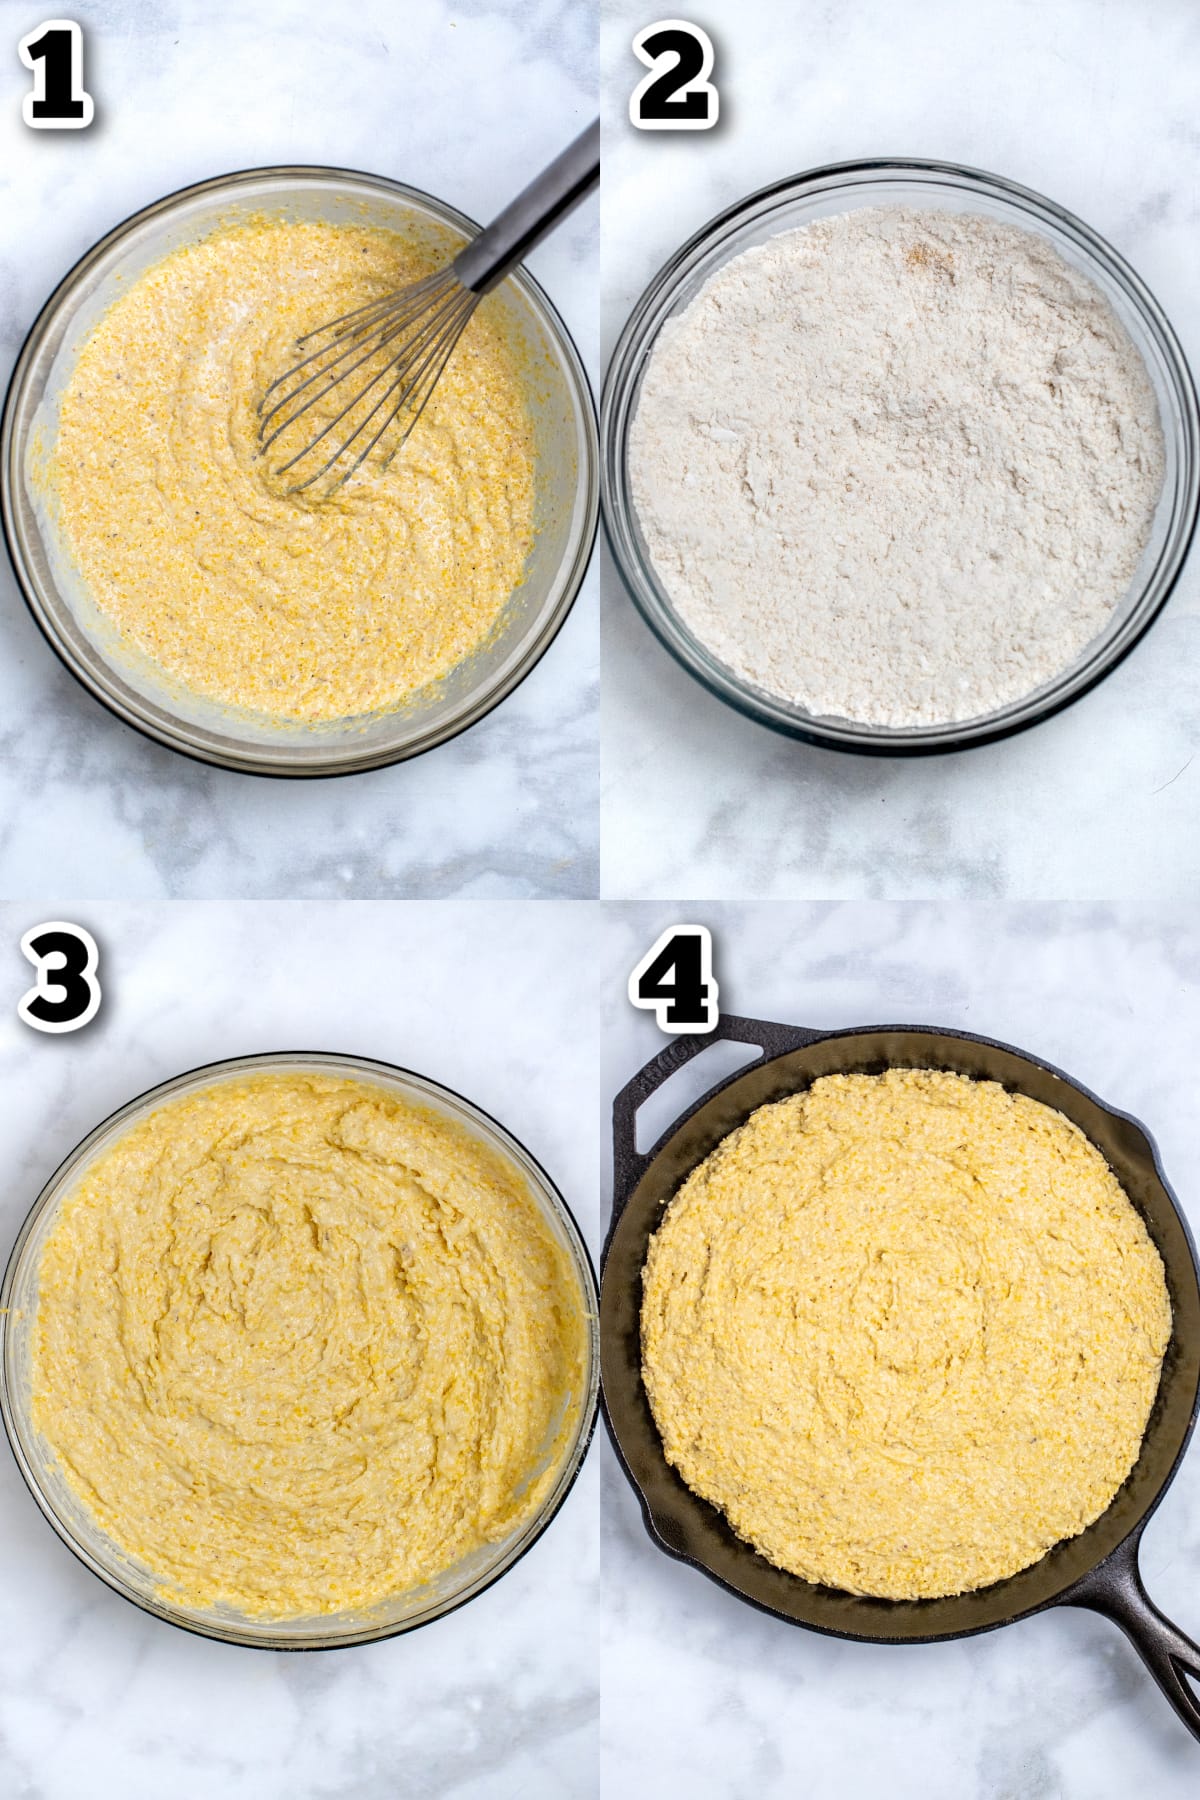 Step by step instructions for how to make gluten free cornbread.